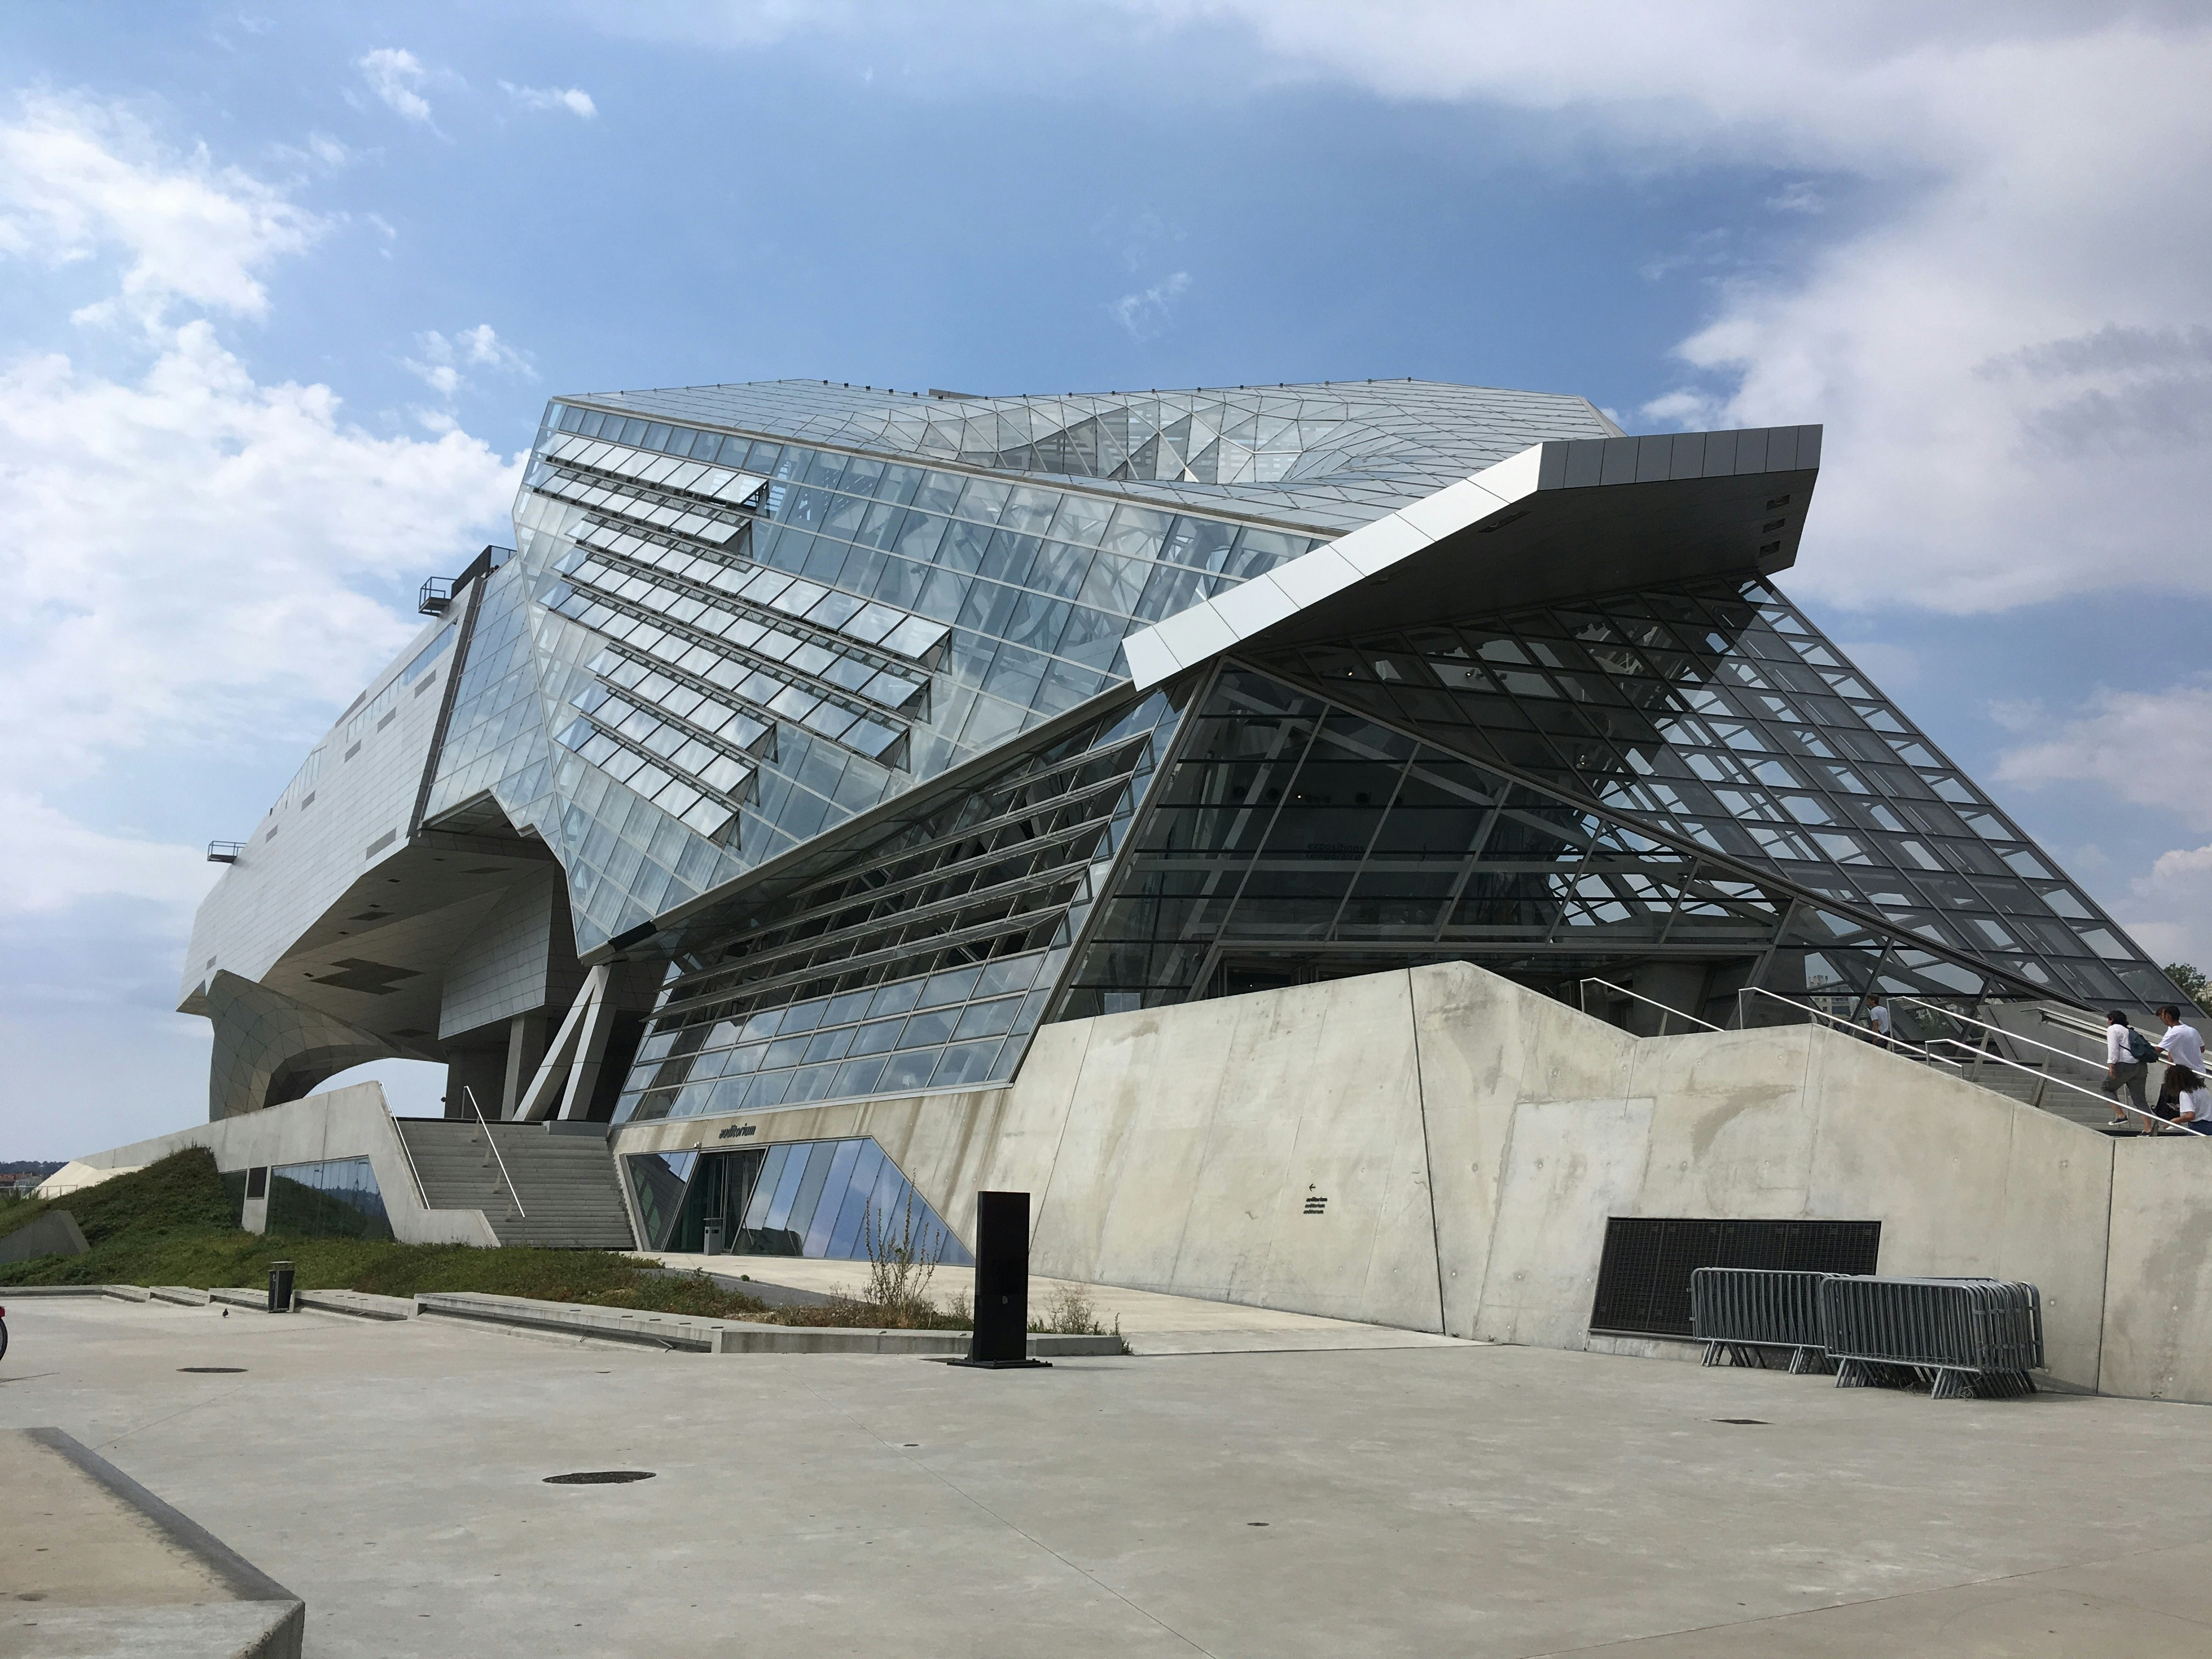 The exterior of the Musée des Confluences is made of glass and steel with a concrete ramp up to the entrance. The building has an unusual shape, a little like a crouching animal